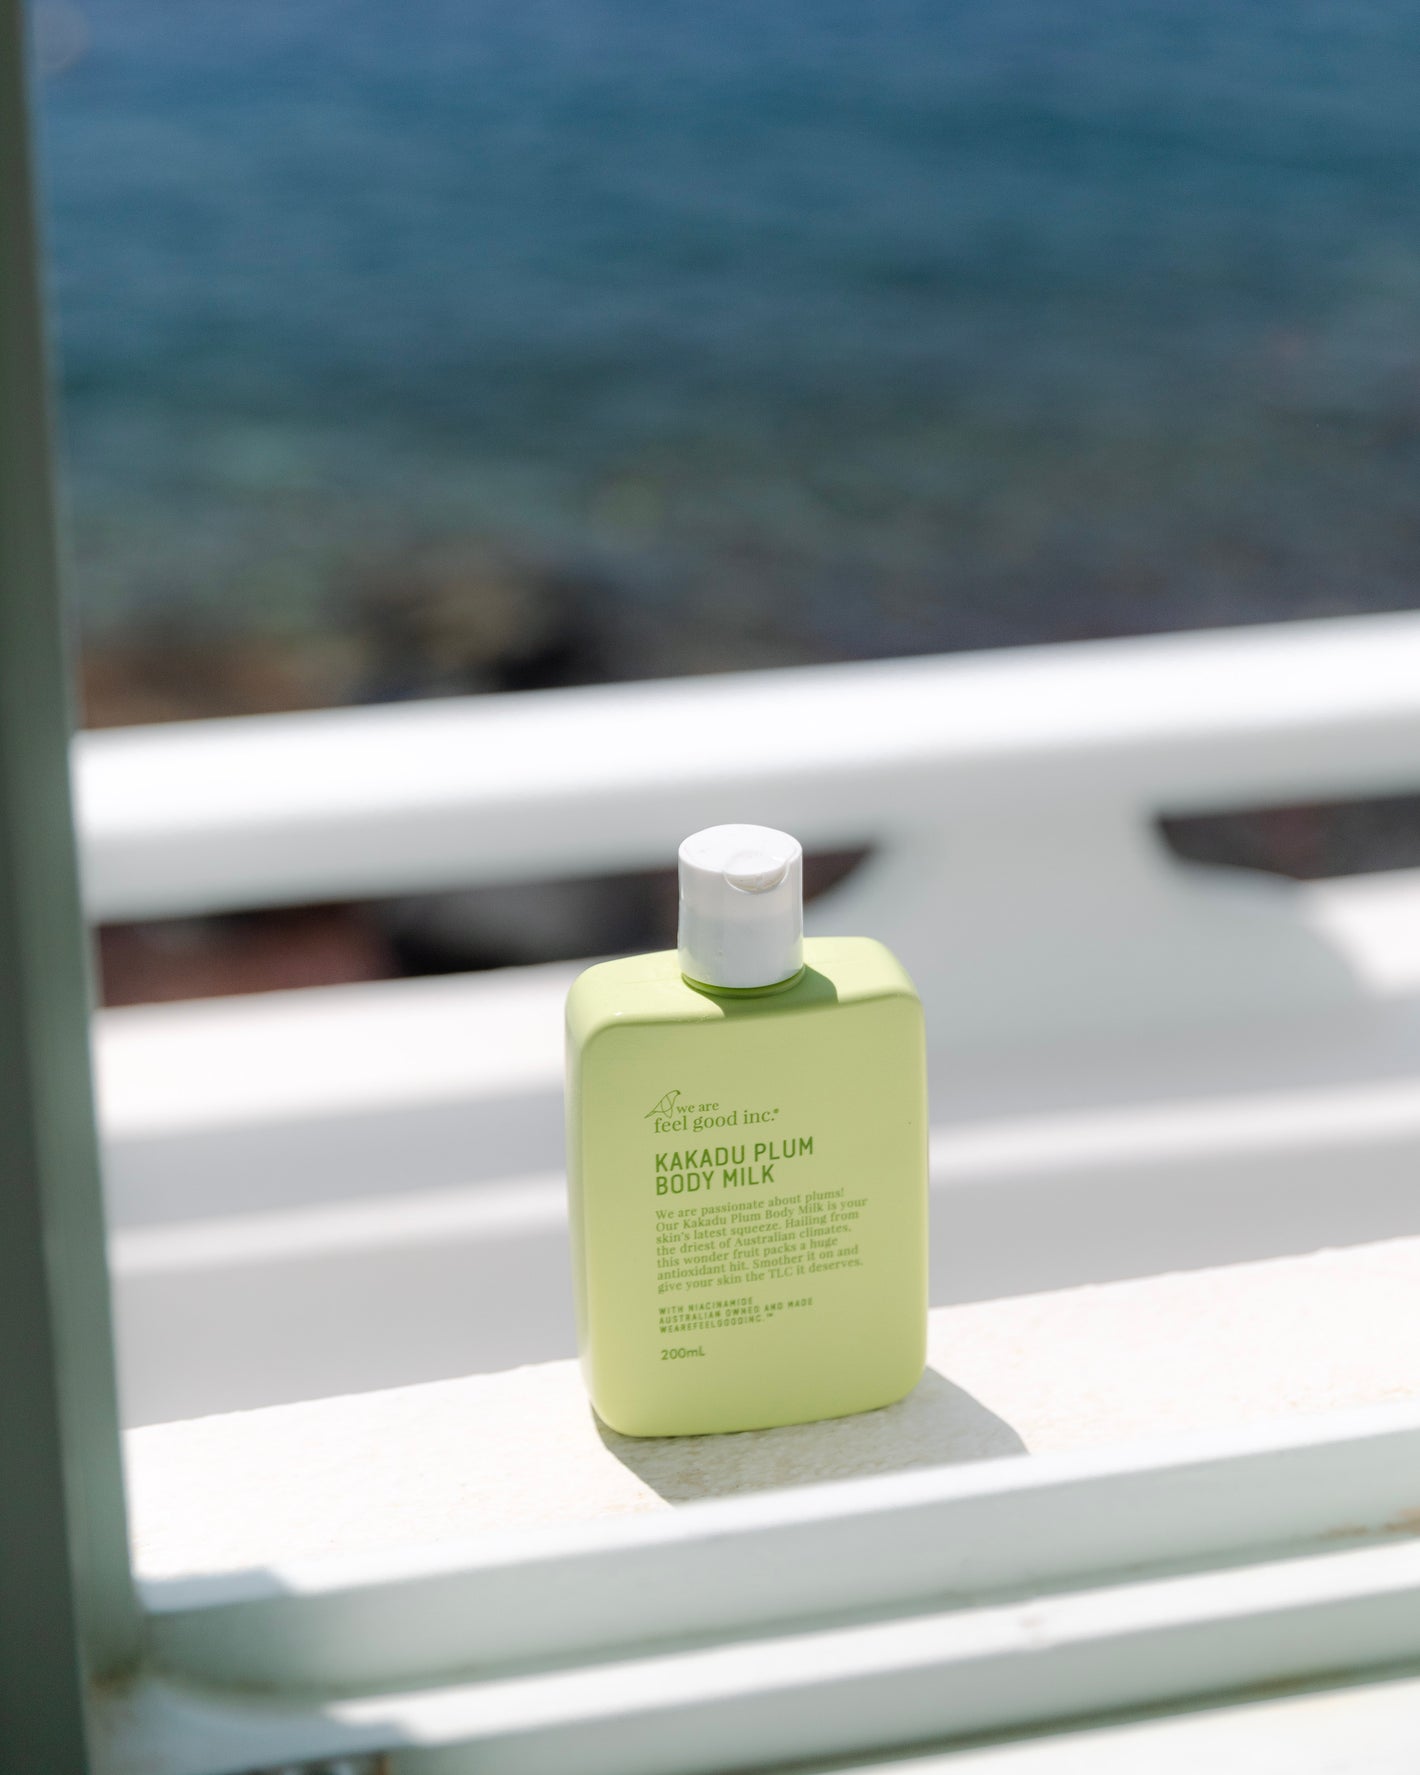 A green bottle of 'We Are Feel Good Inc. Kakadu Plum Body Milk' is placed on a white ledge with a blurred seascape in the background.